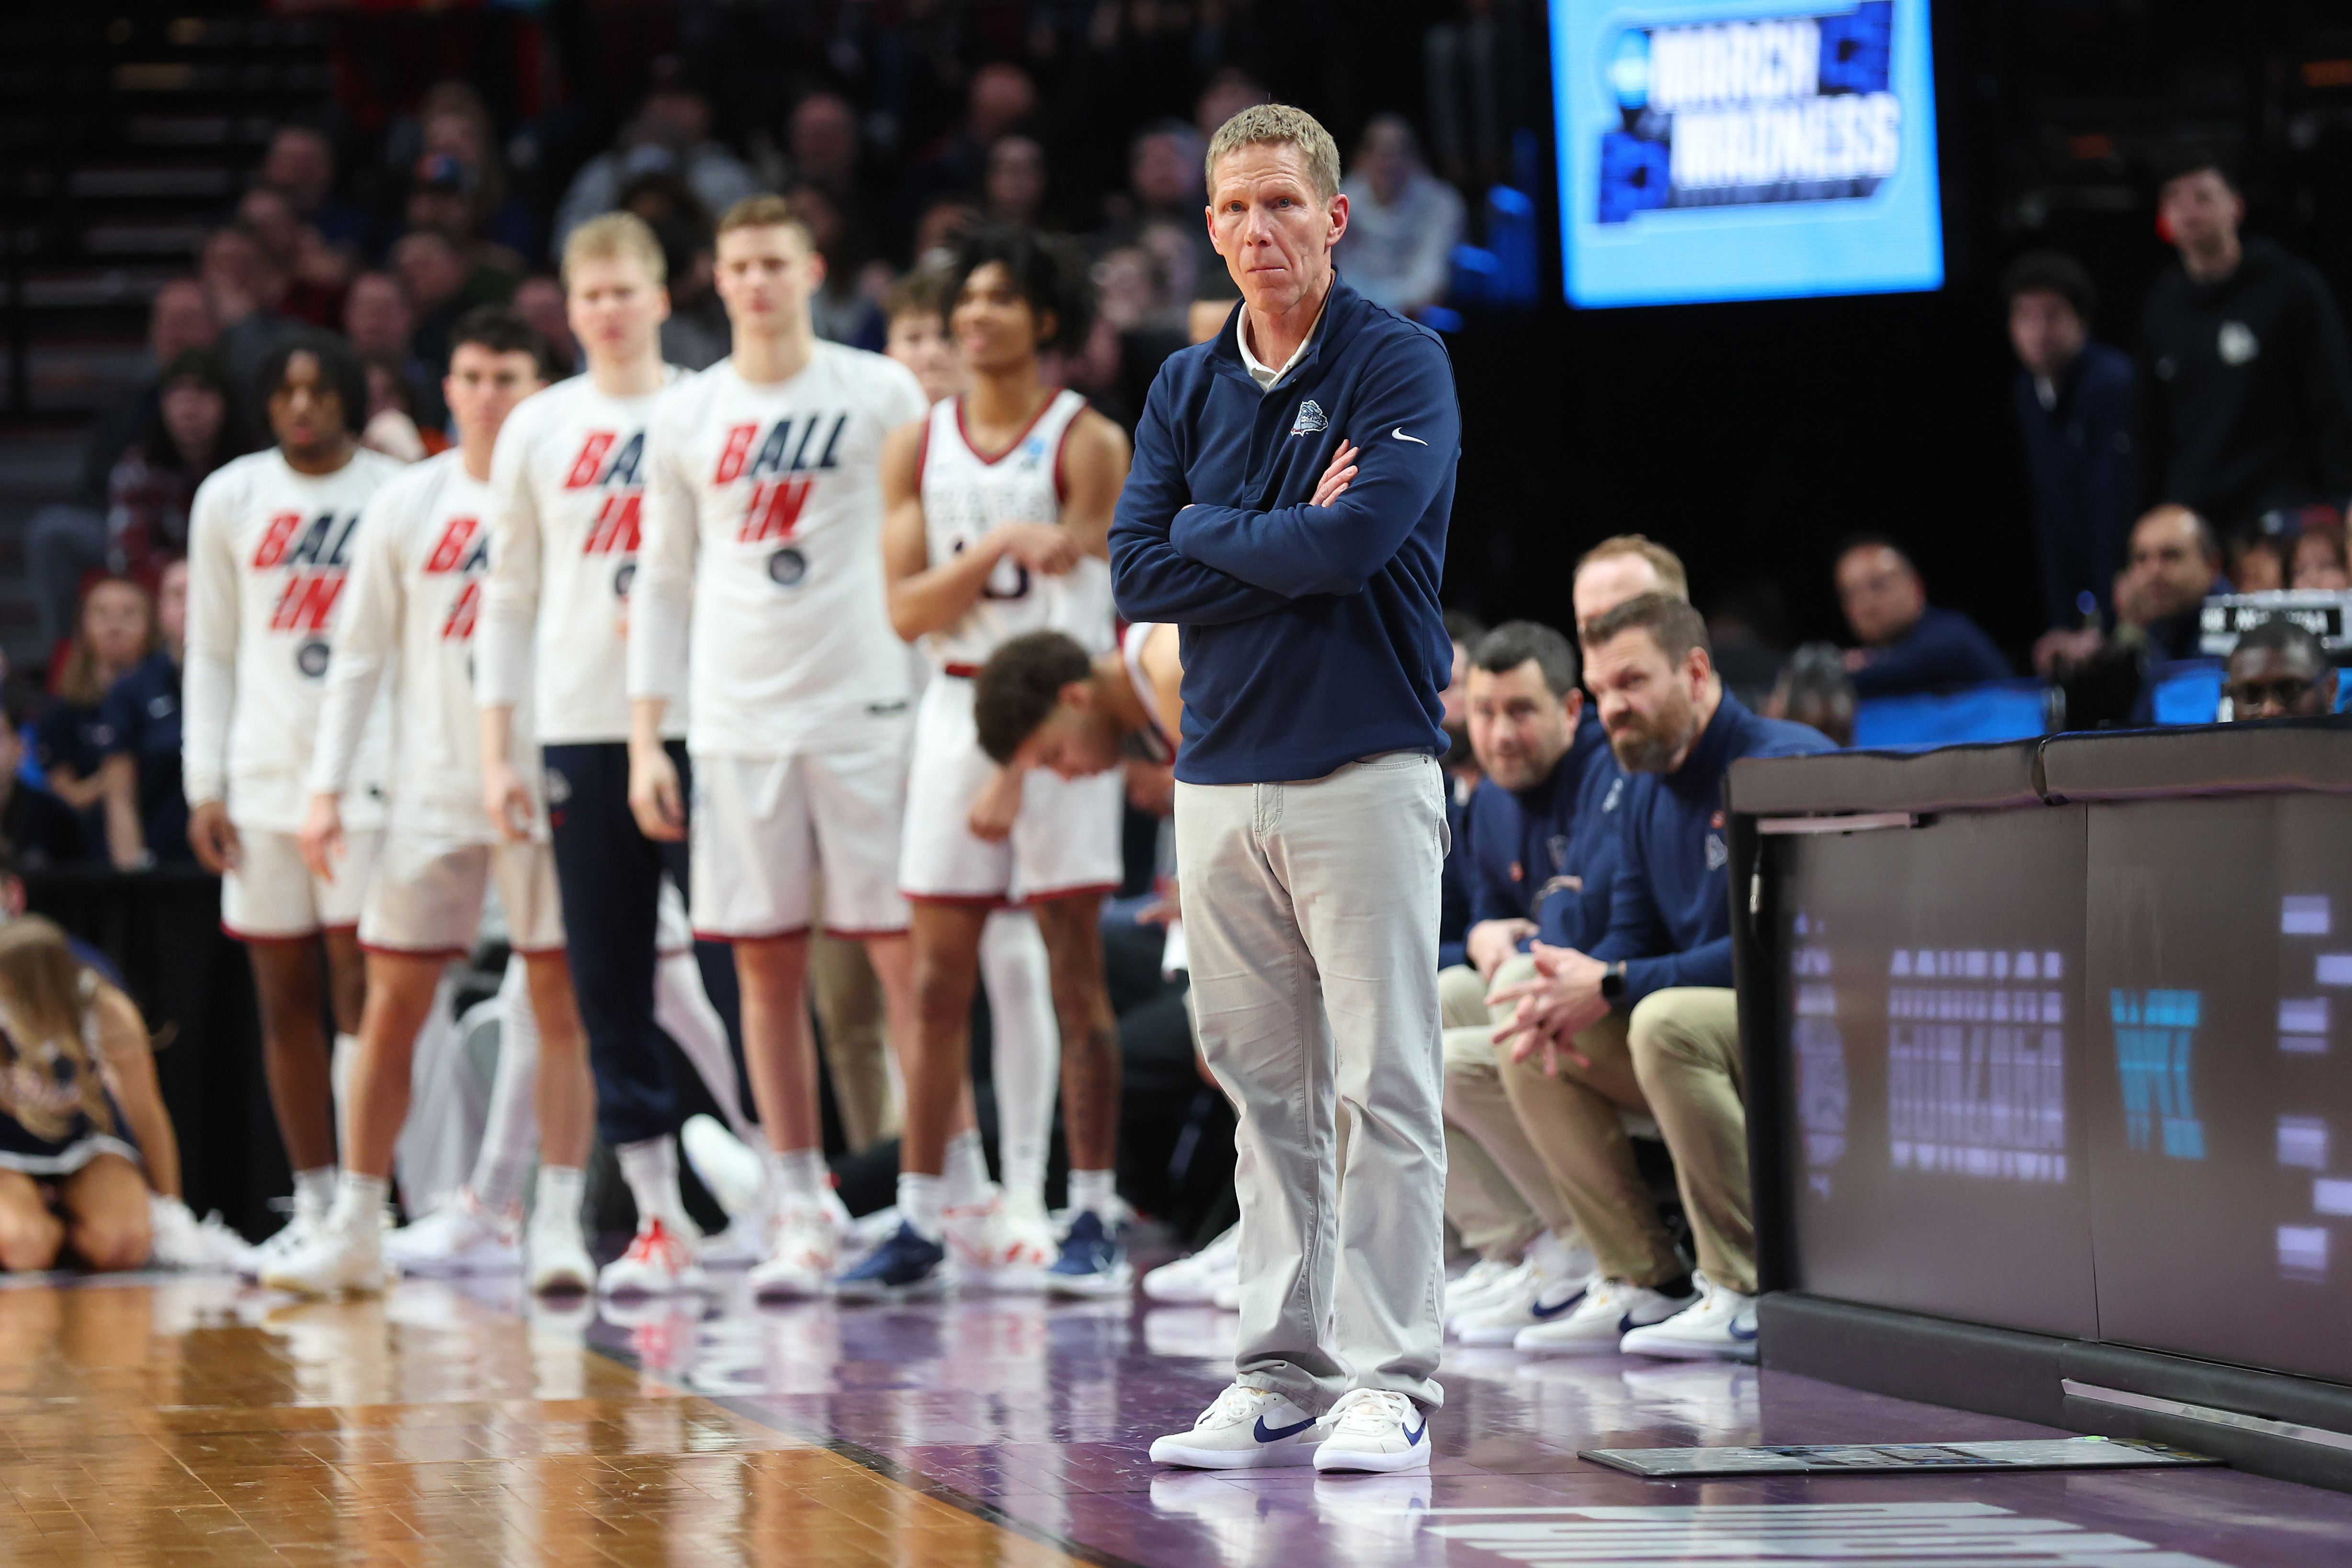 Head coach Mark Few of the Gonzaga Bulldogs looks on during the second half against the Memphis Tigers in the second round of the 2022 NCAA Men’s Basketball Tournament at Moda Center on March 19, 2022 in Portland, Oregon.